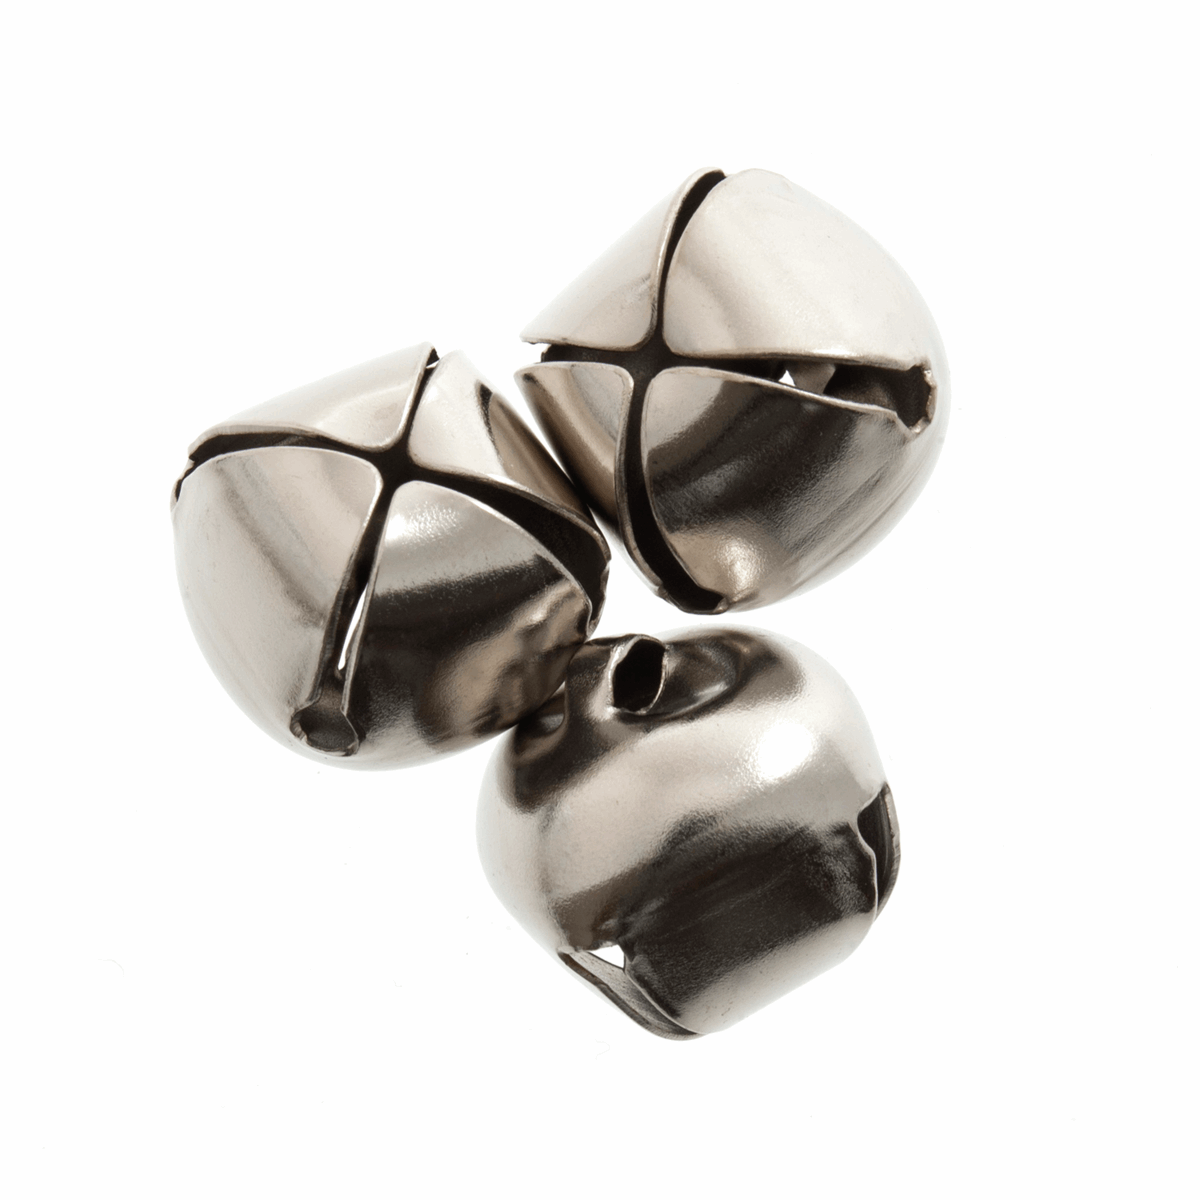 Silver Jingle Bells - 15mm (Pack of 4)